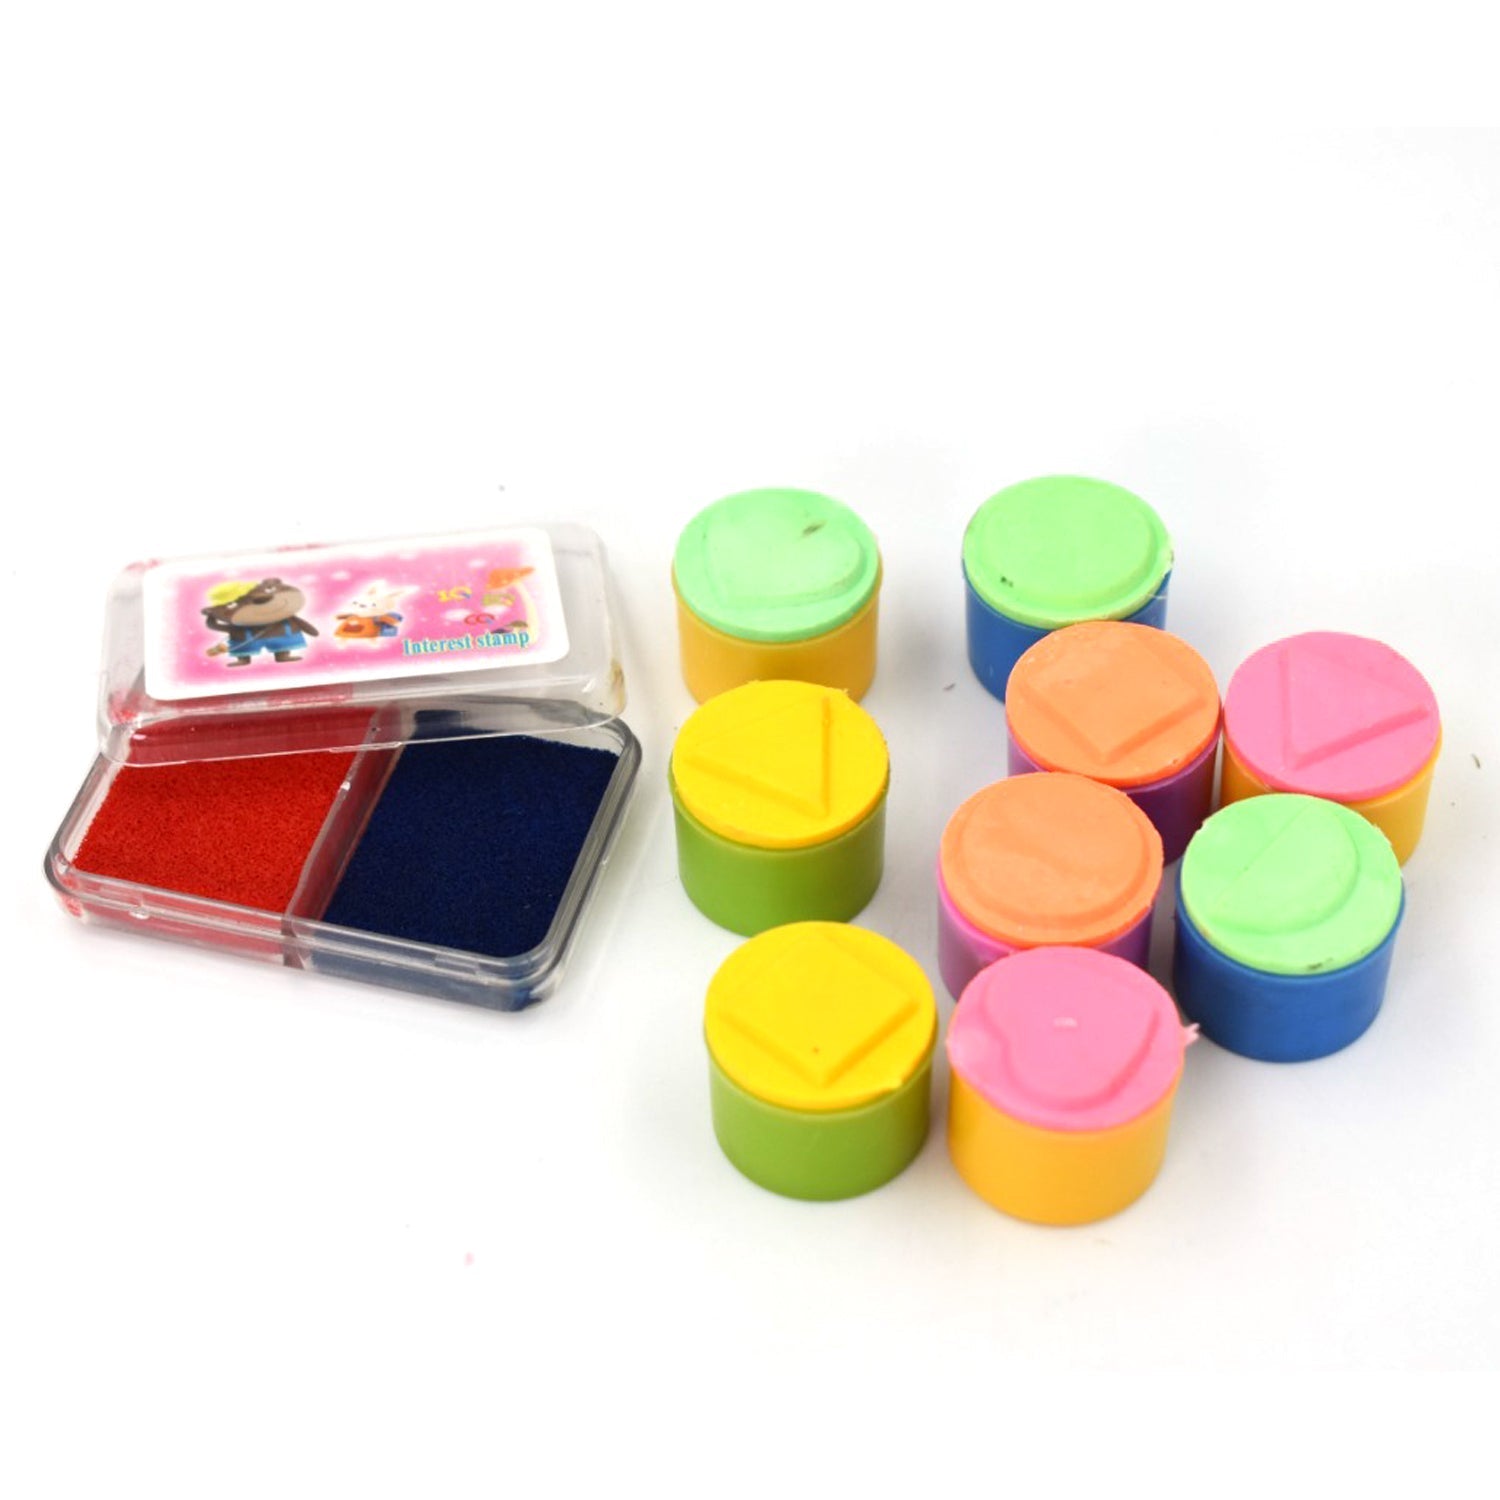 4811 Stamps Eraser 10 pieces for School Craft & Prefect Gift for Teachers, Parents and Students (Multicolor) freeshipping - DeoDap